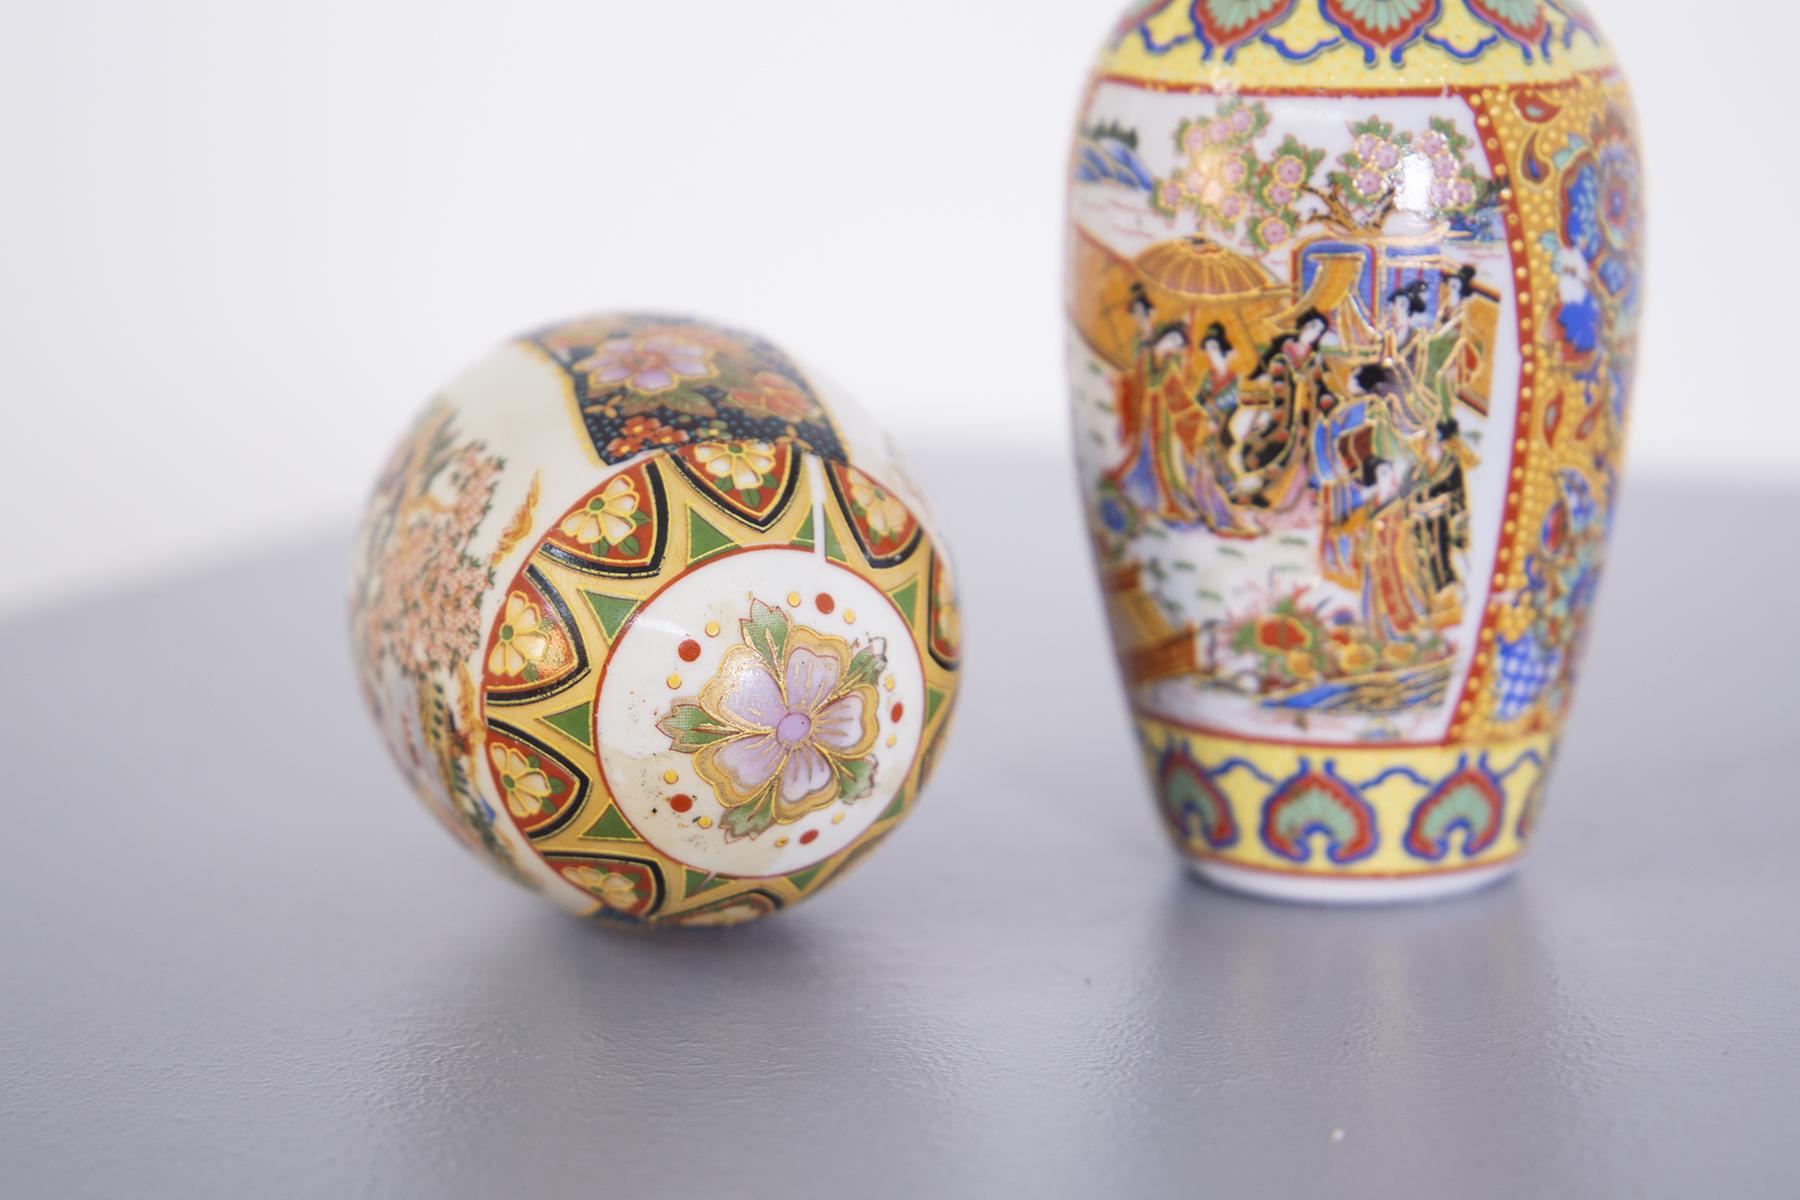 Beautiful Chinese porcelain set in Chinese art from the early 1900s.
The set consists of a porcelain vase and egg and are beautifully hand painted, depicting scenes of Chinese daily life of the period.
The ornamental Chinese Porcelain set is ideal